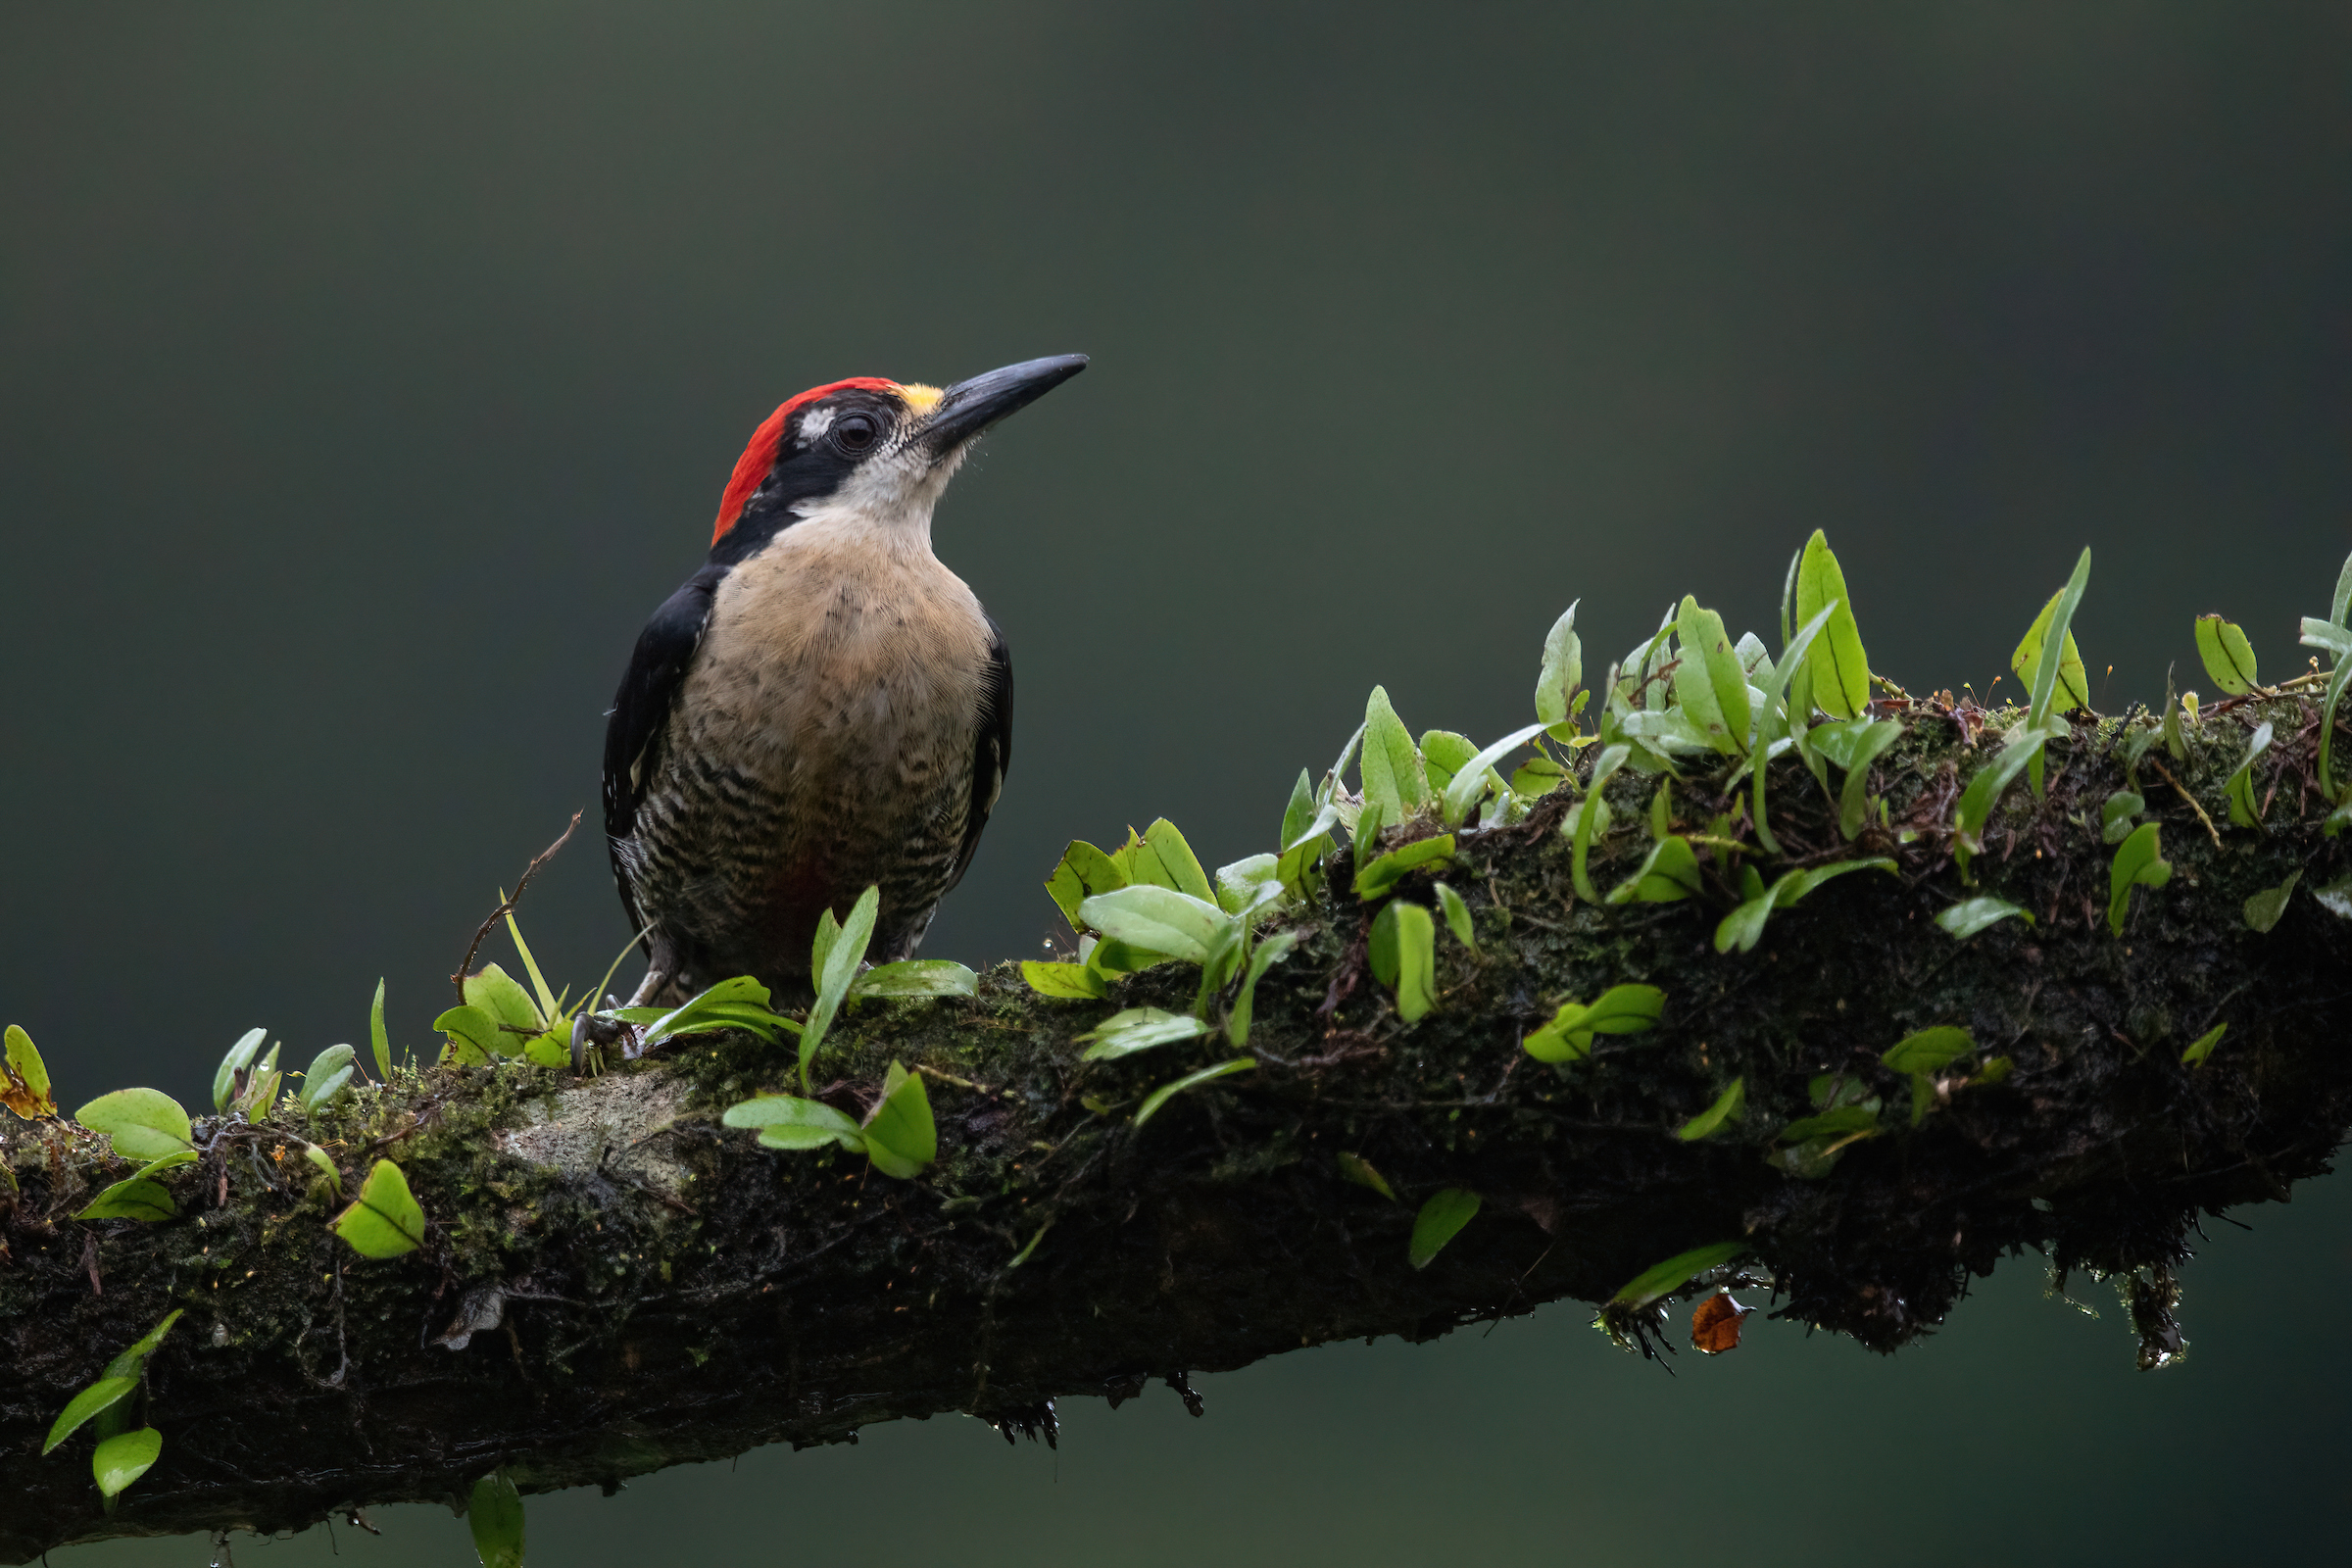 Portrait of an Black-cheeked Woodpecker on our Costa Rica wildlife photography tour